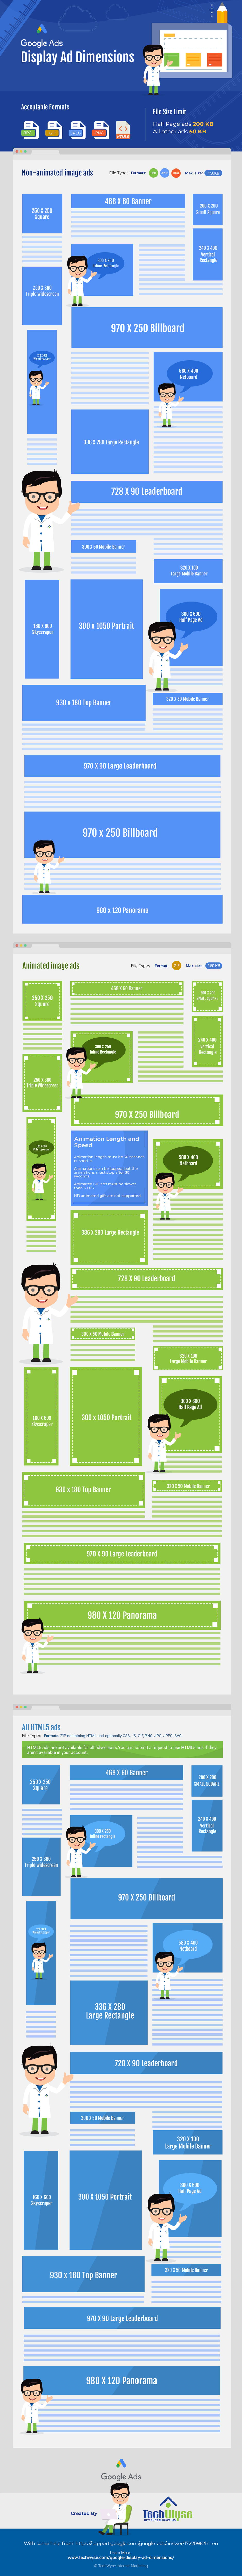 Google Display Ad Dimensions Infographic